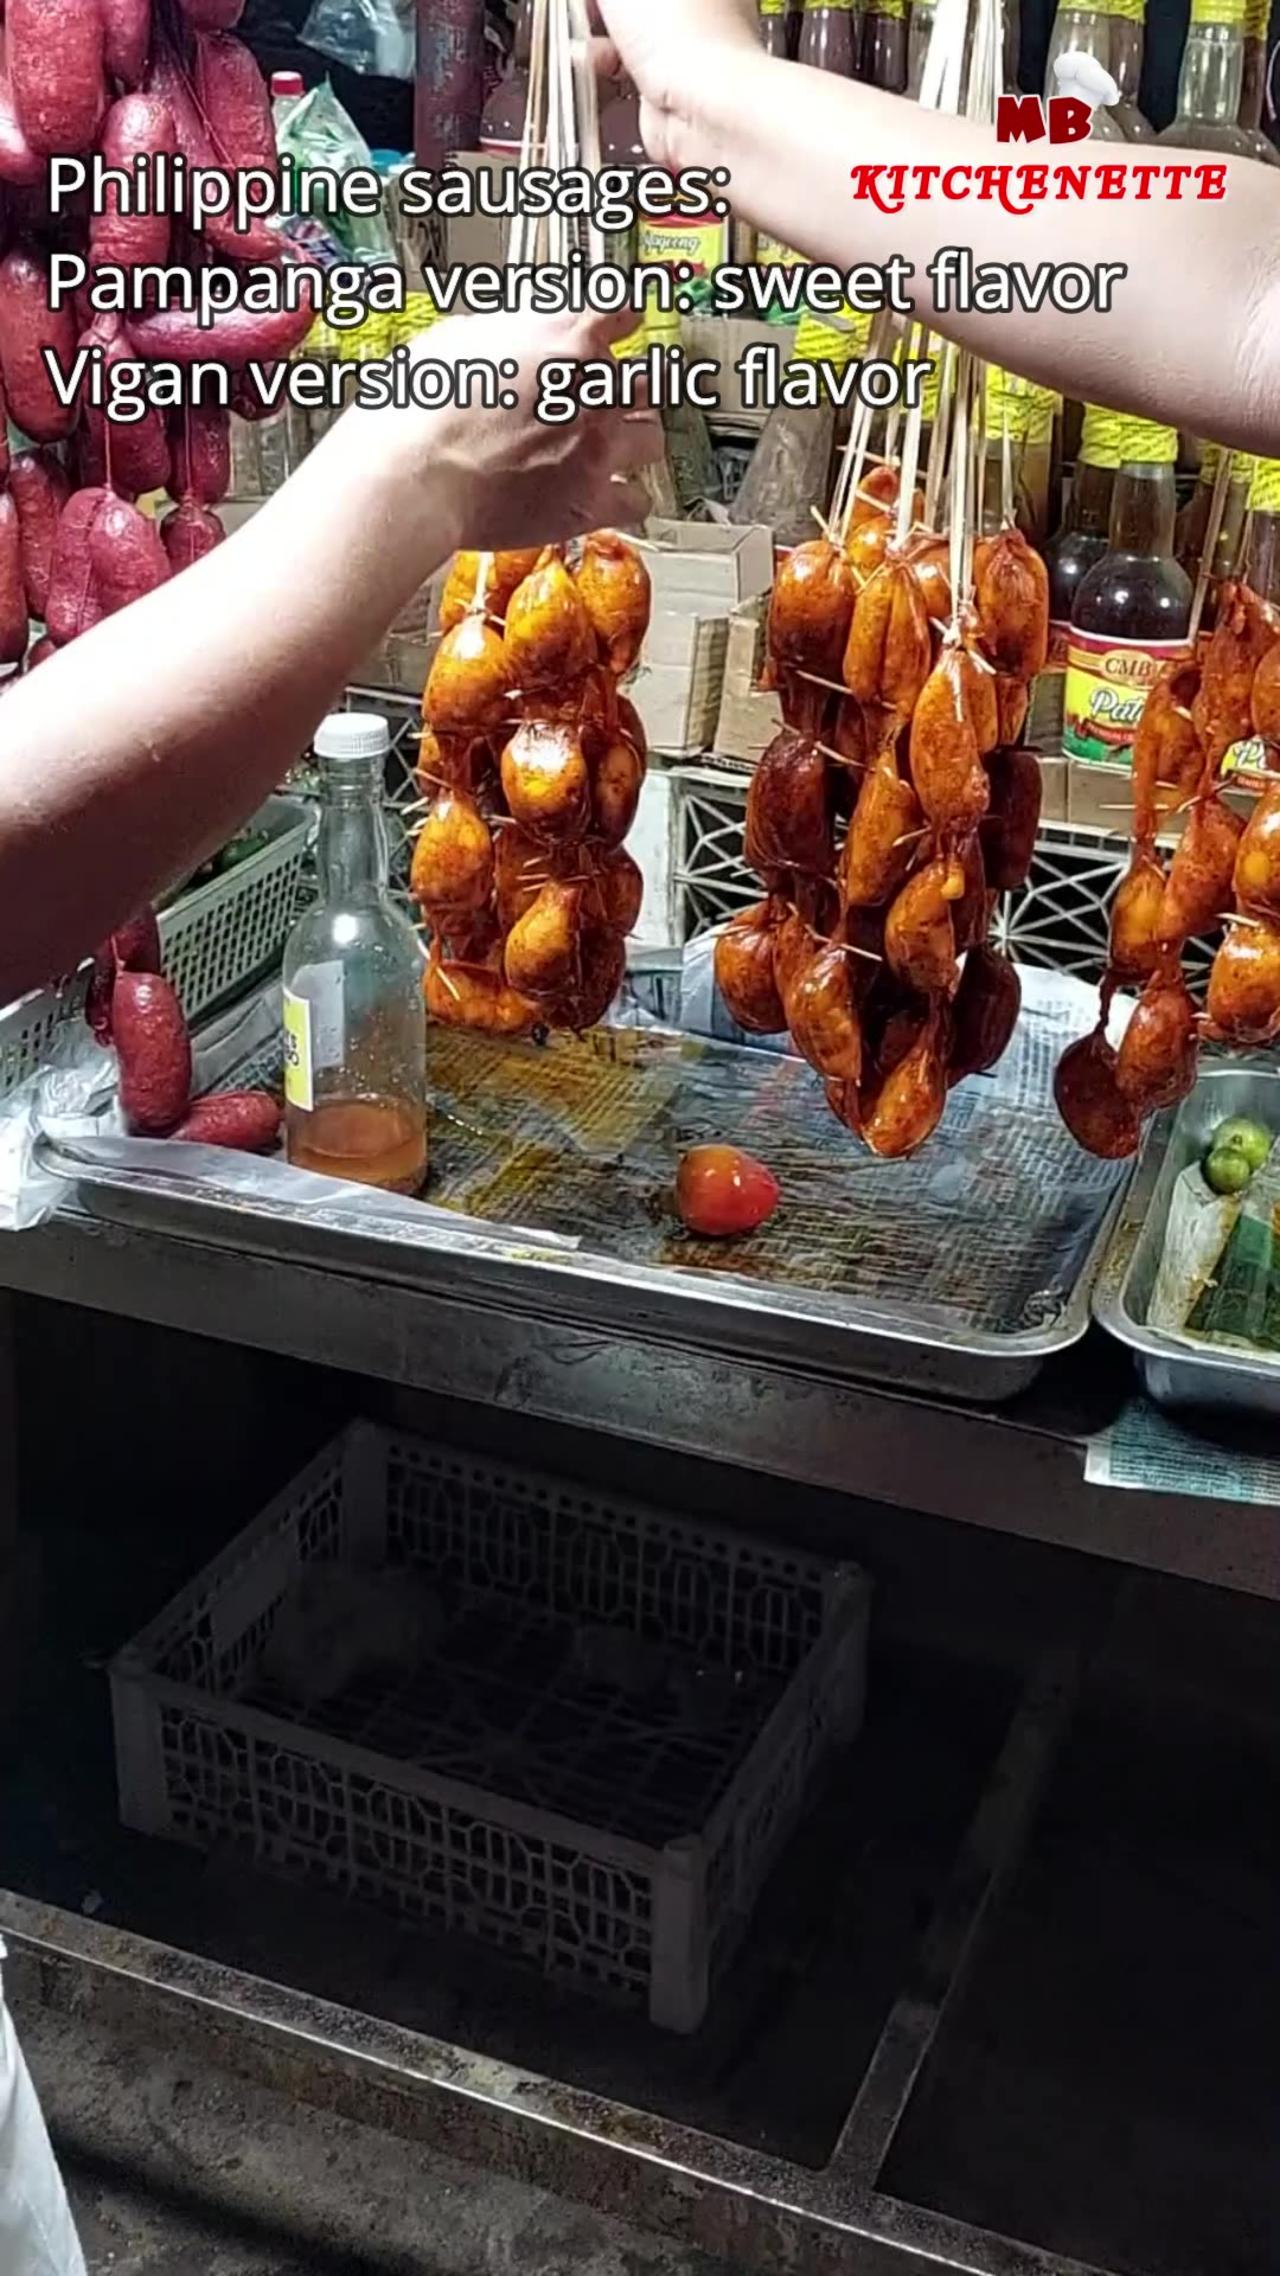 Night market in the Philippines! Philippine sausages, vigan or pampanga style. What is your choice!!